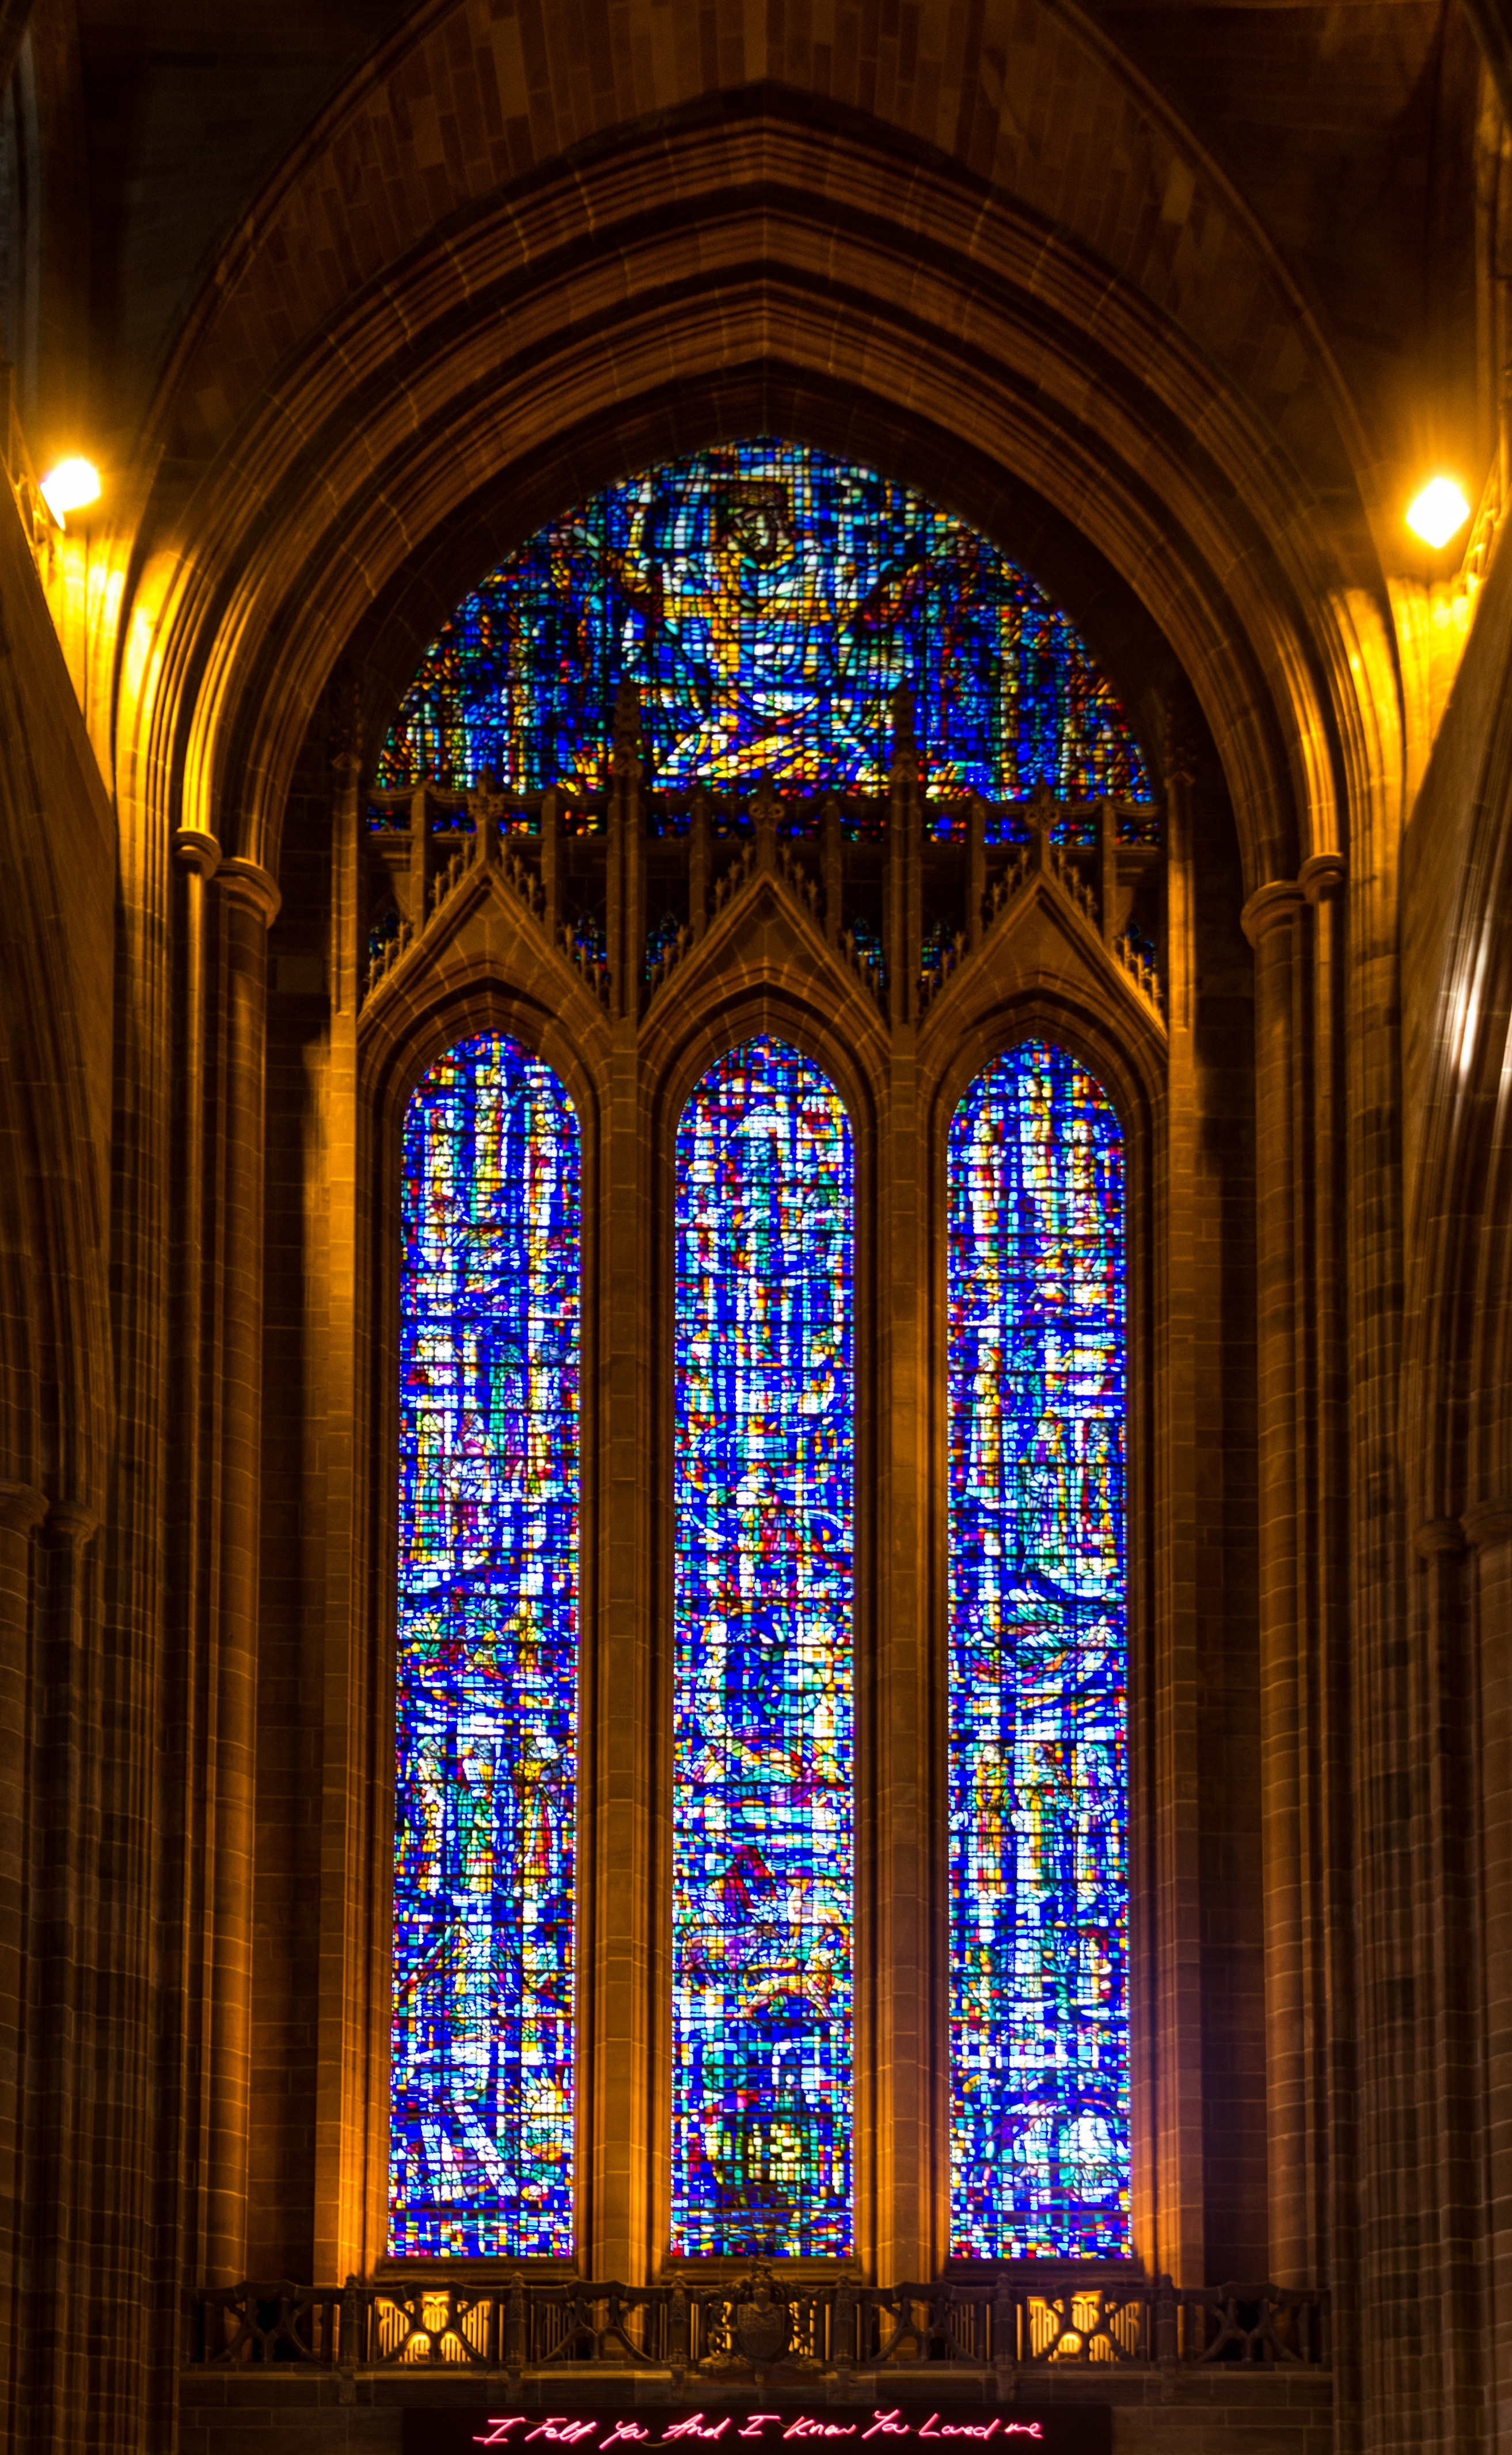 stained glass windows in cathedrals